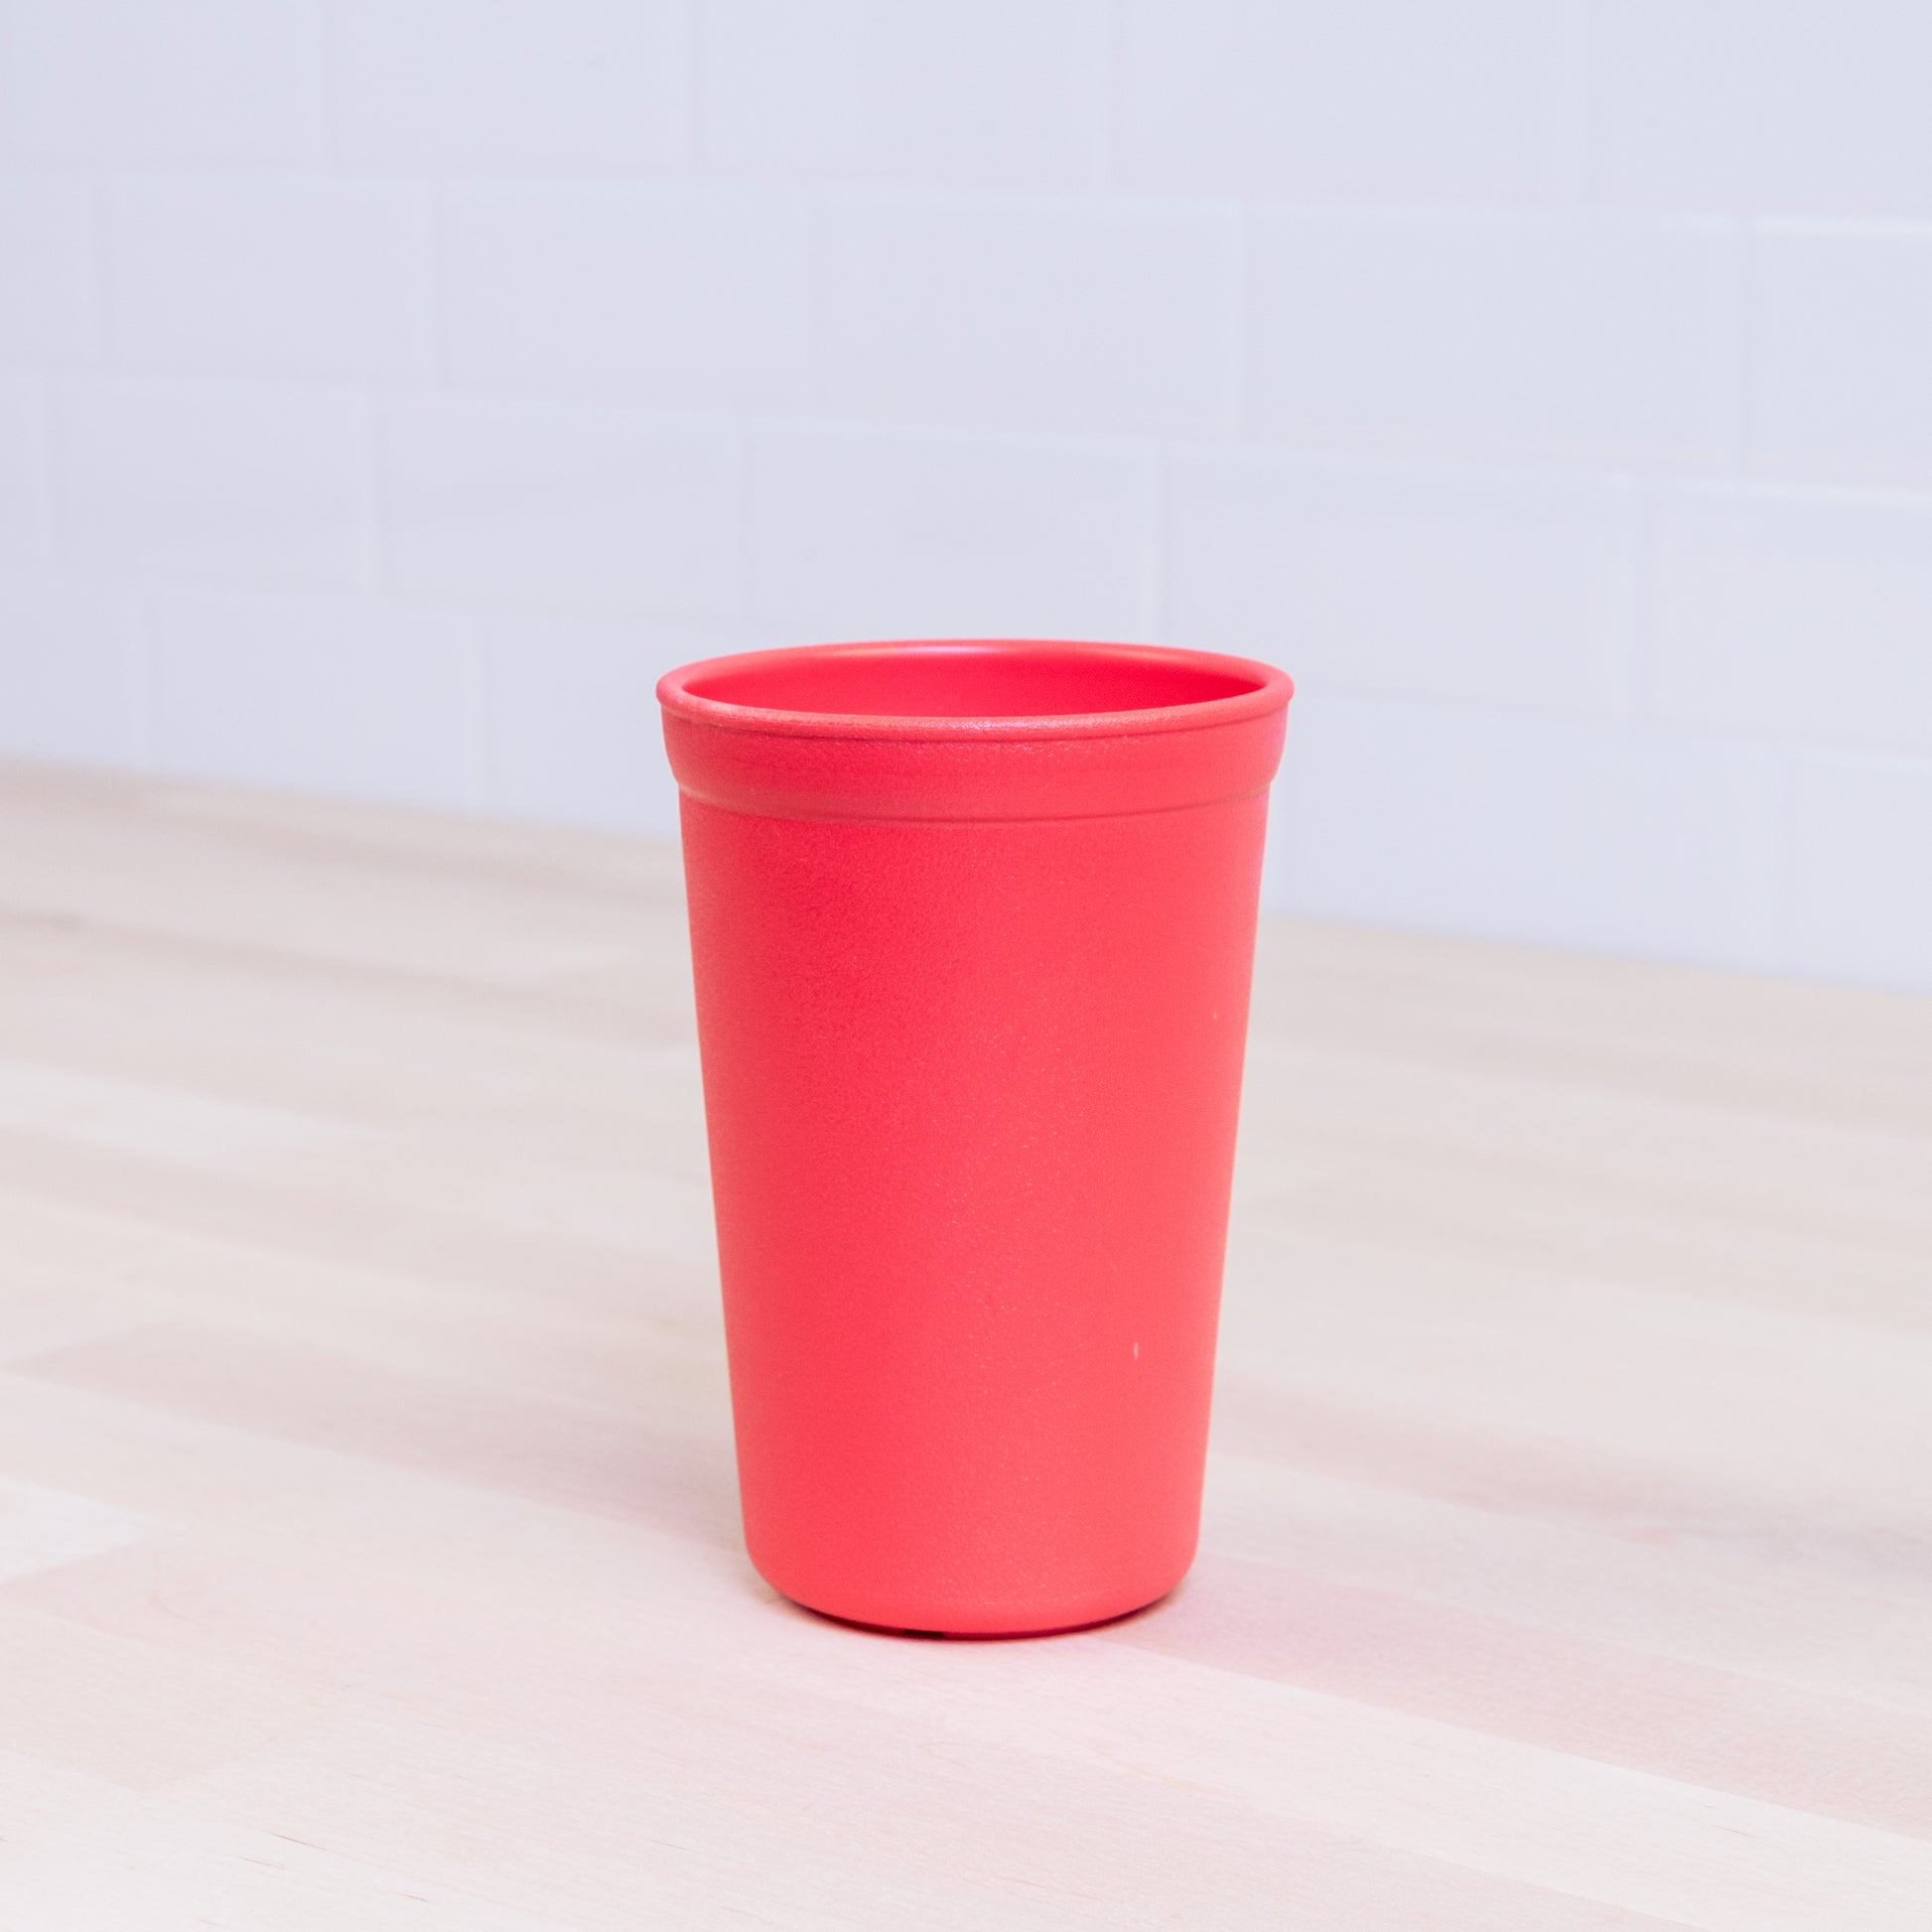 Re-Play Tumbler in Red from Bear & Moo